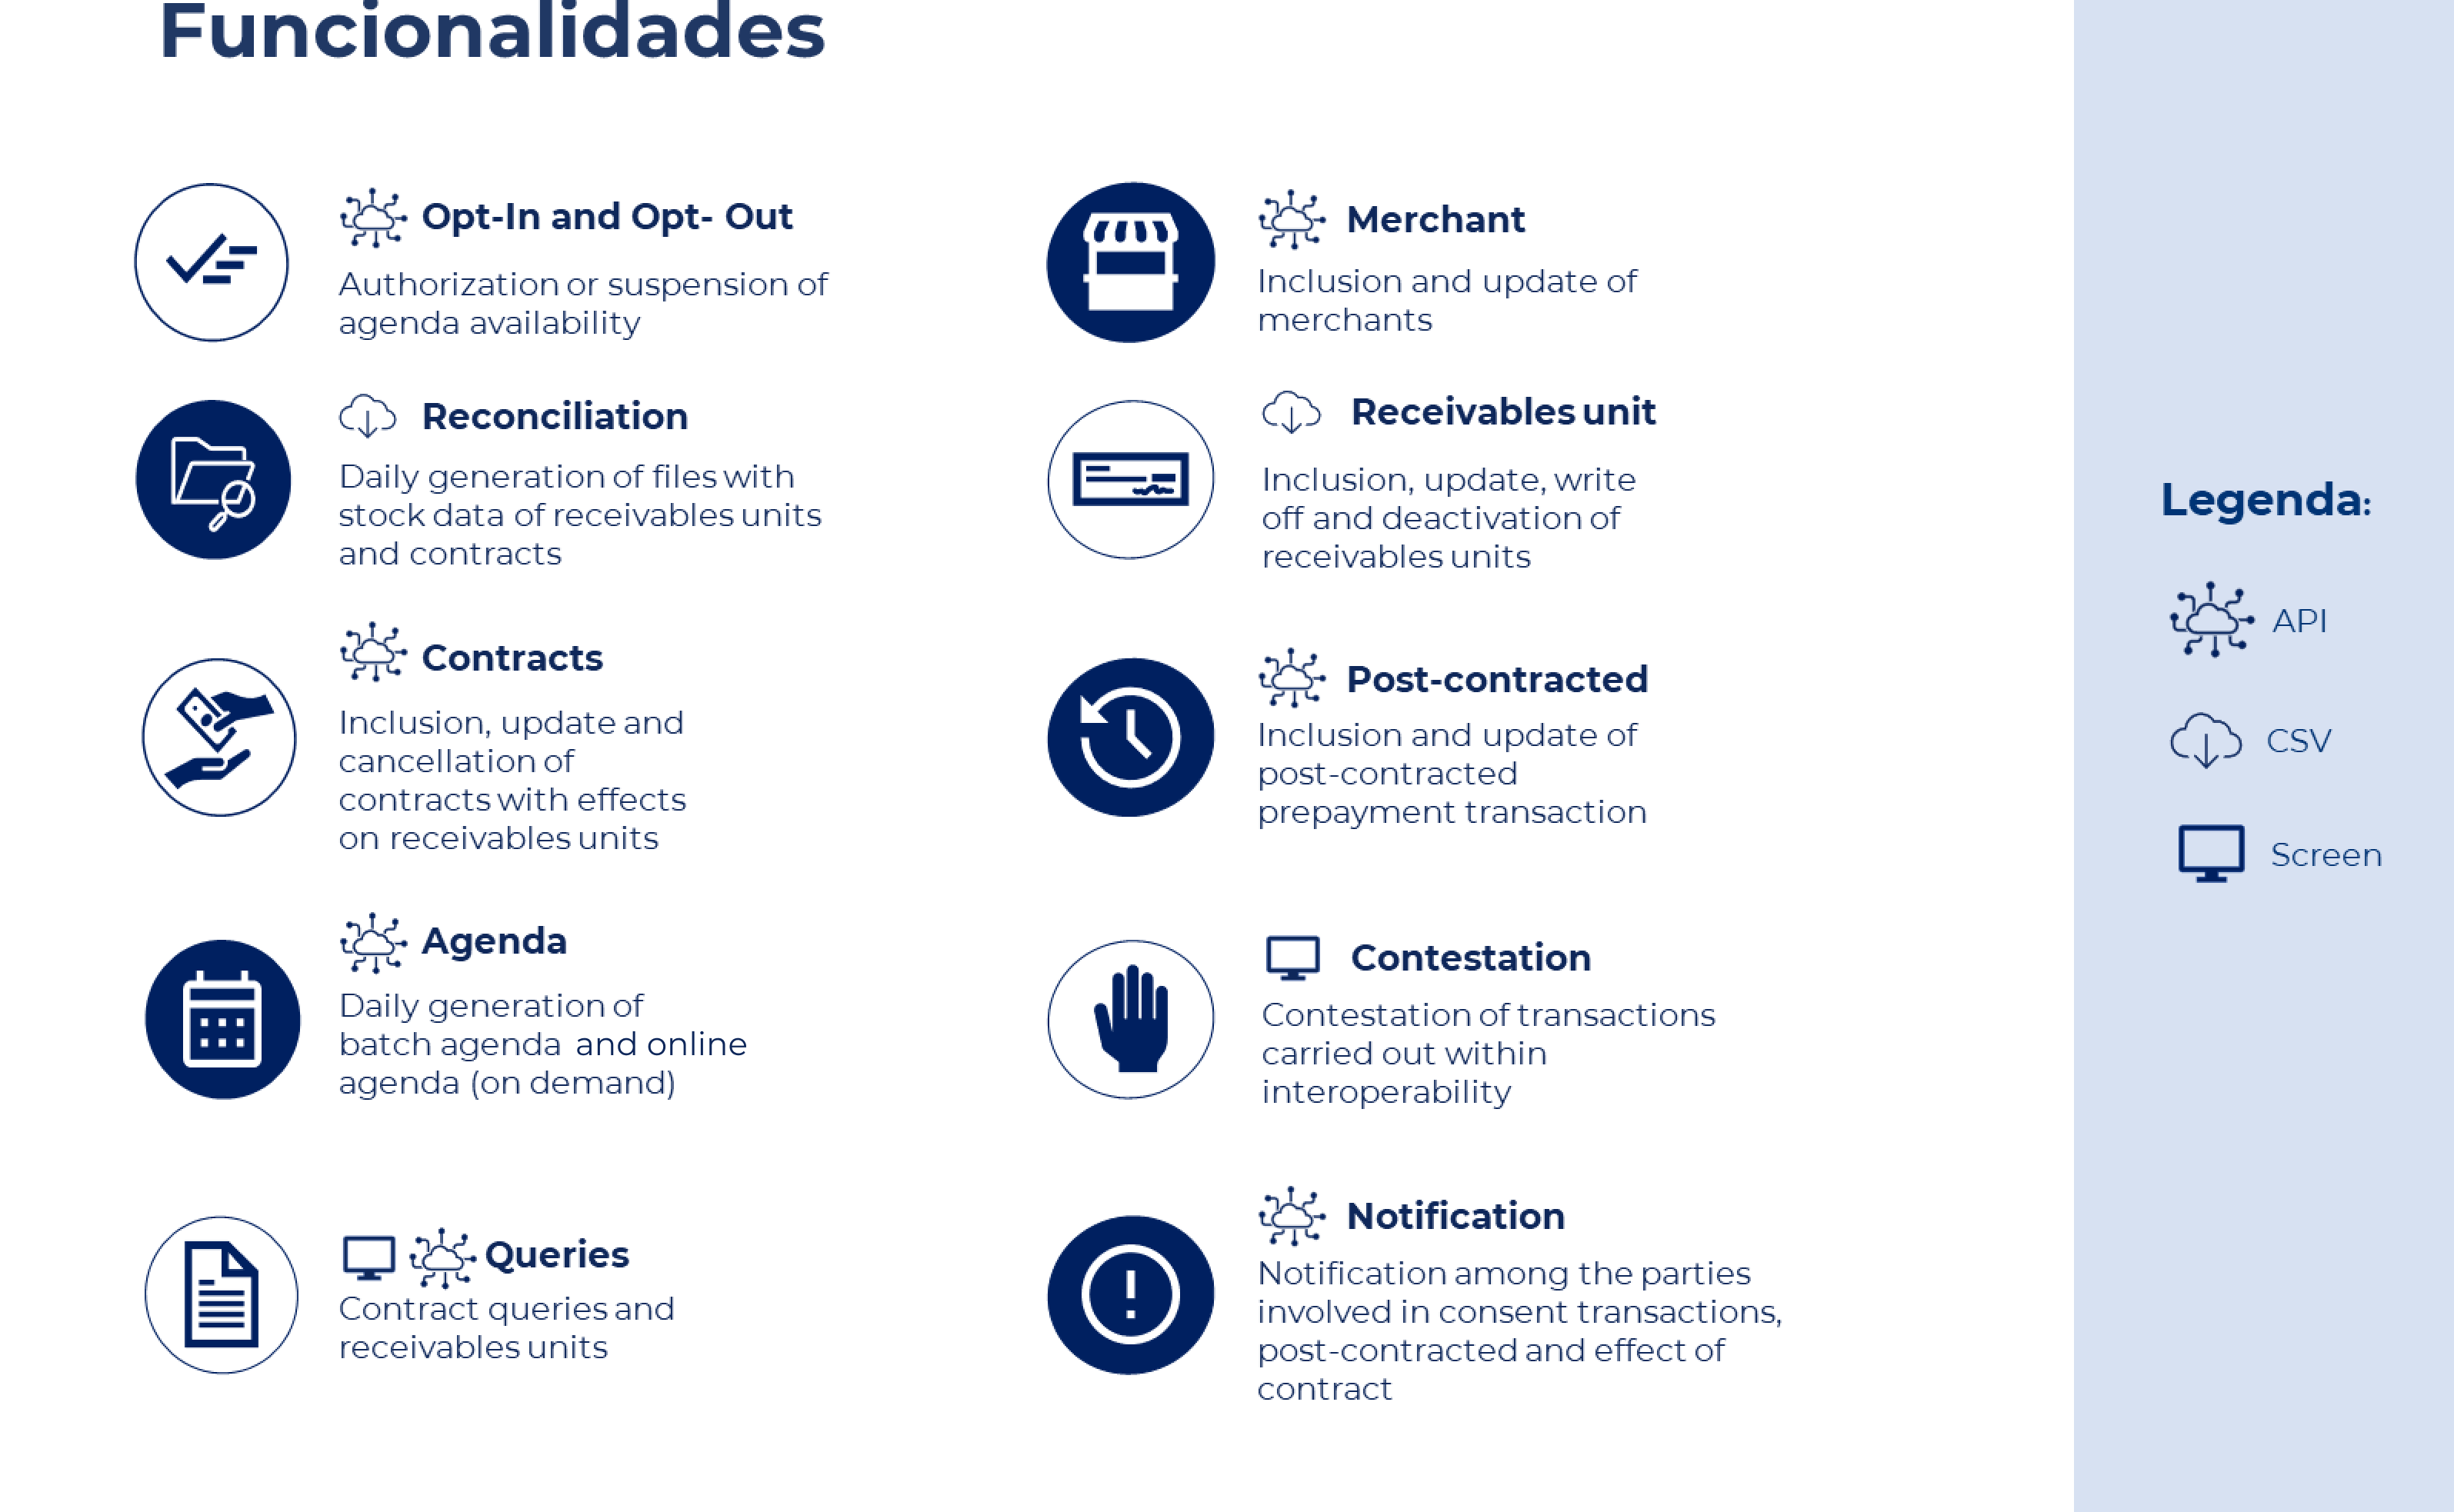 The image demonstrates the Card Receivables Market functionalities and will be explained in the expandable link: Functionalities and Solutions.